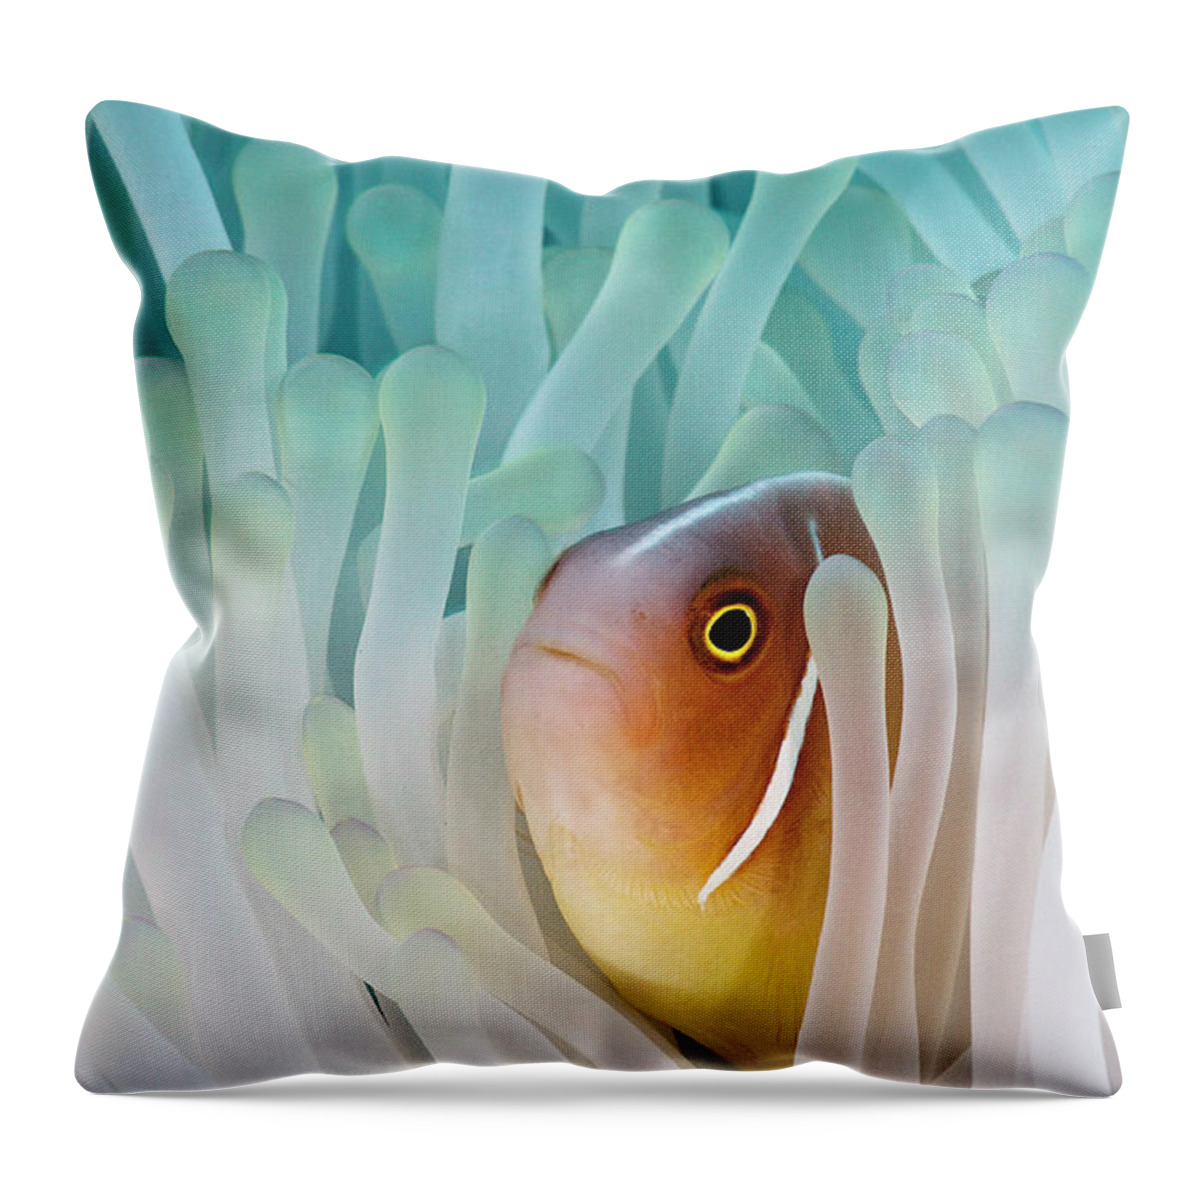 Underwater Throw Pillow featuring the photograph Pink Skunk Clownfish by Liquid Kingdom - Kim Yusuf Underwater Photography